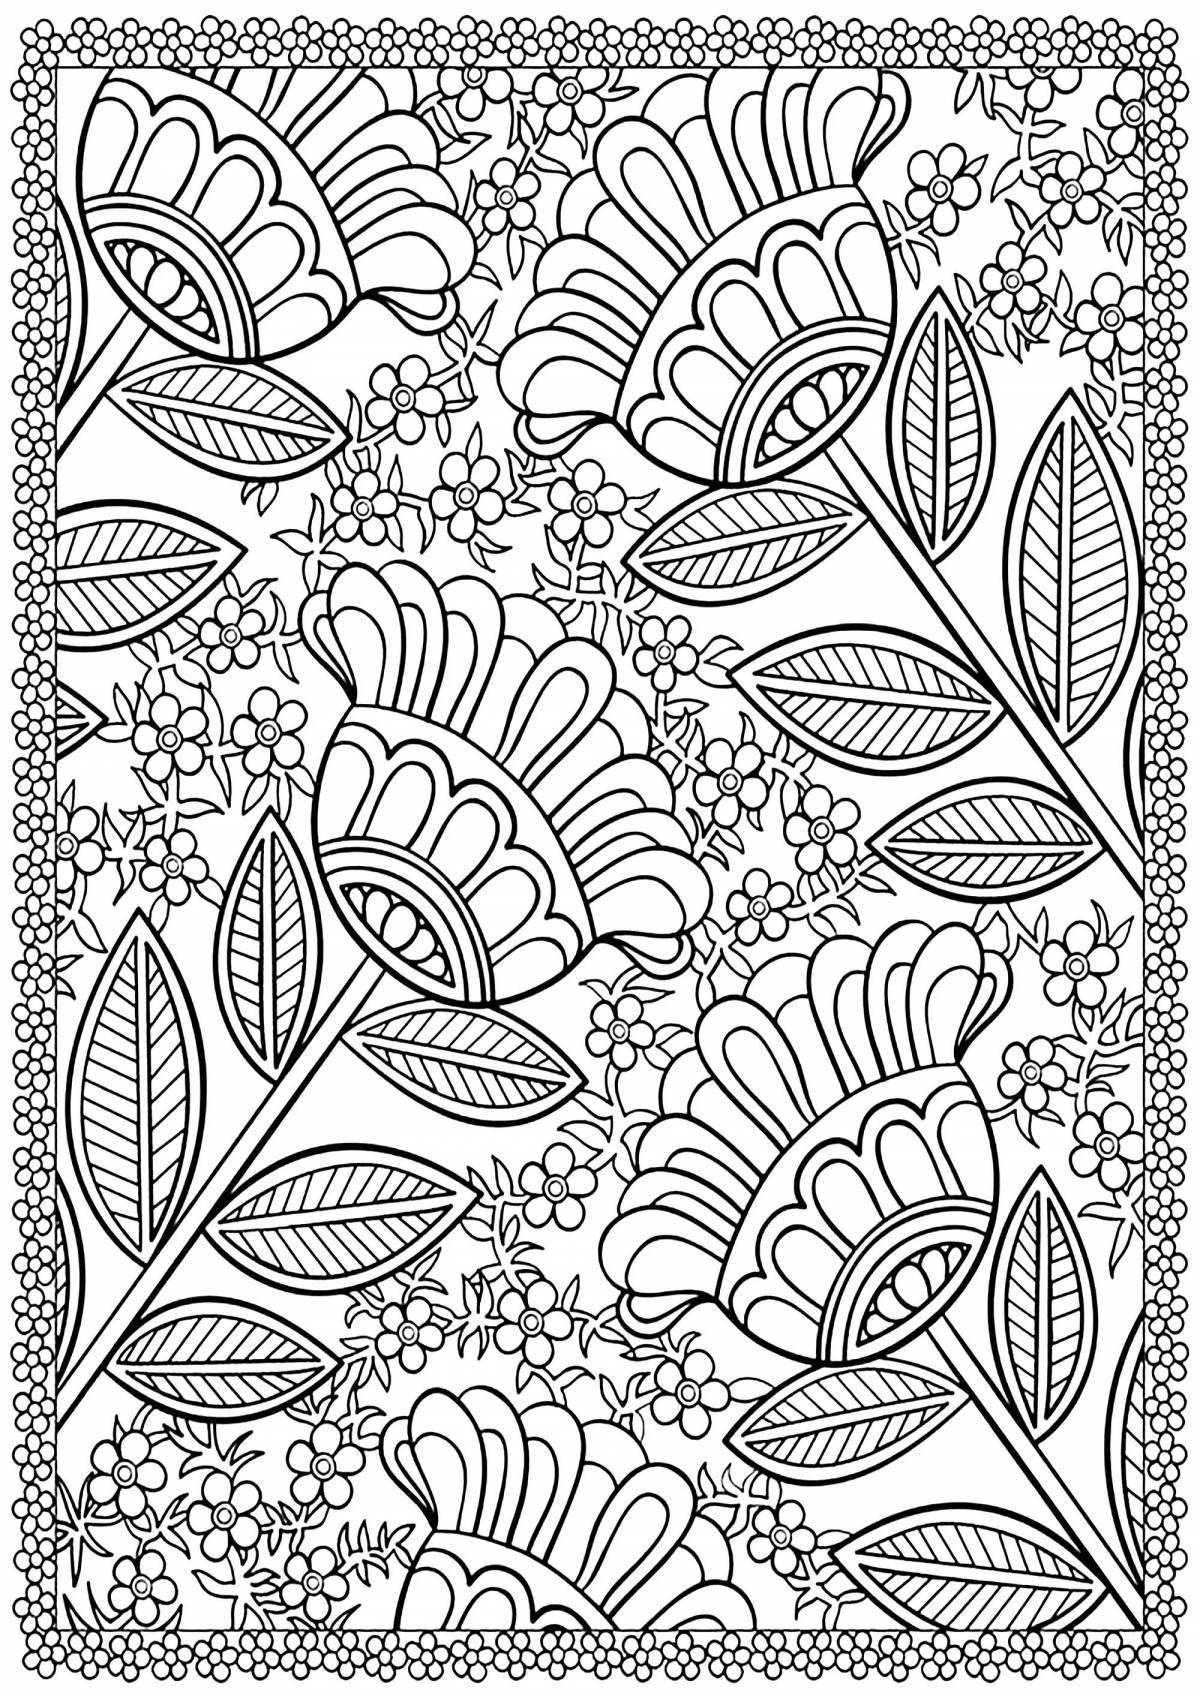 Adorable coloring pages magic patterns